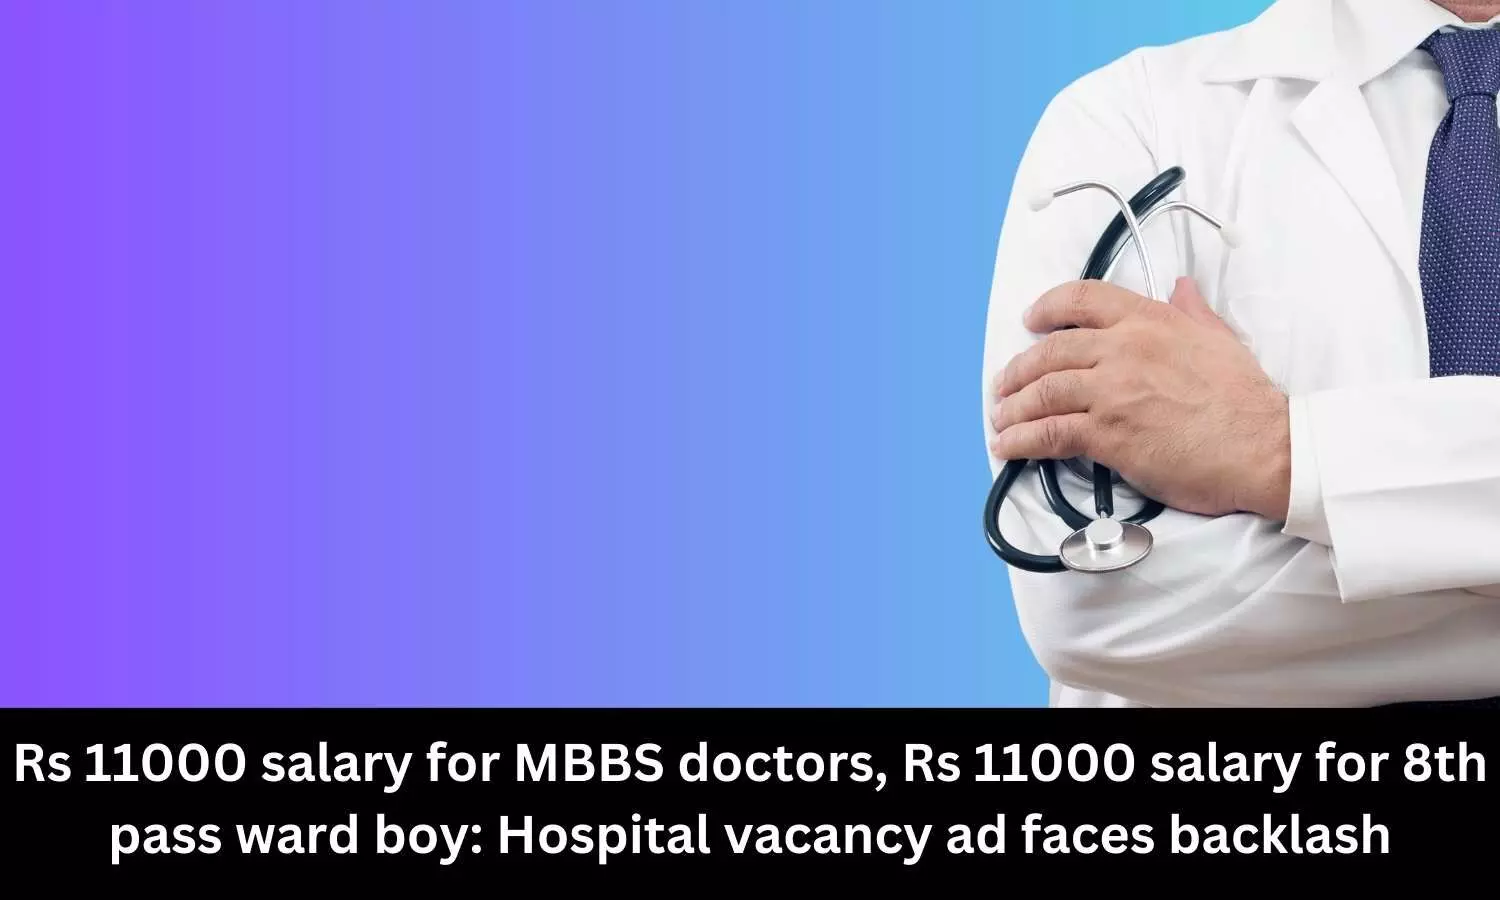 Rs 11000 salary for MBBS doctors, Rs 11000 salary for 8th pass ward boy: Hospital vacancy ad faces backlash